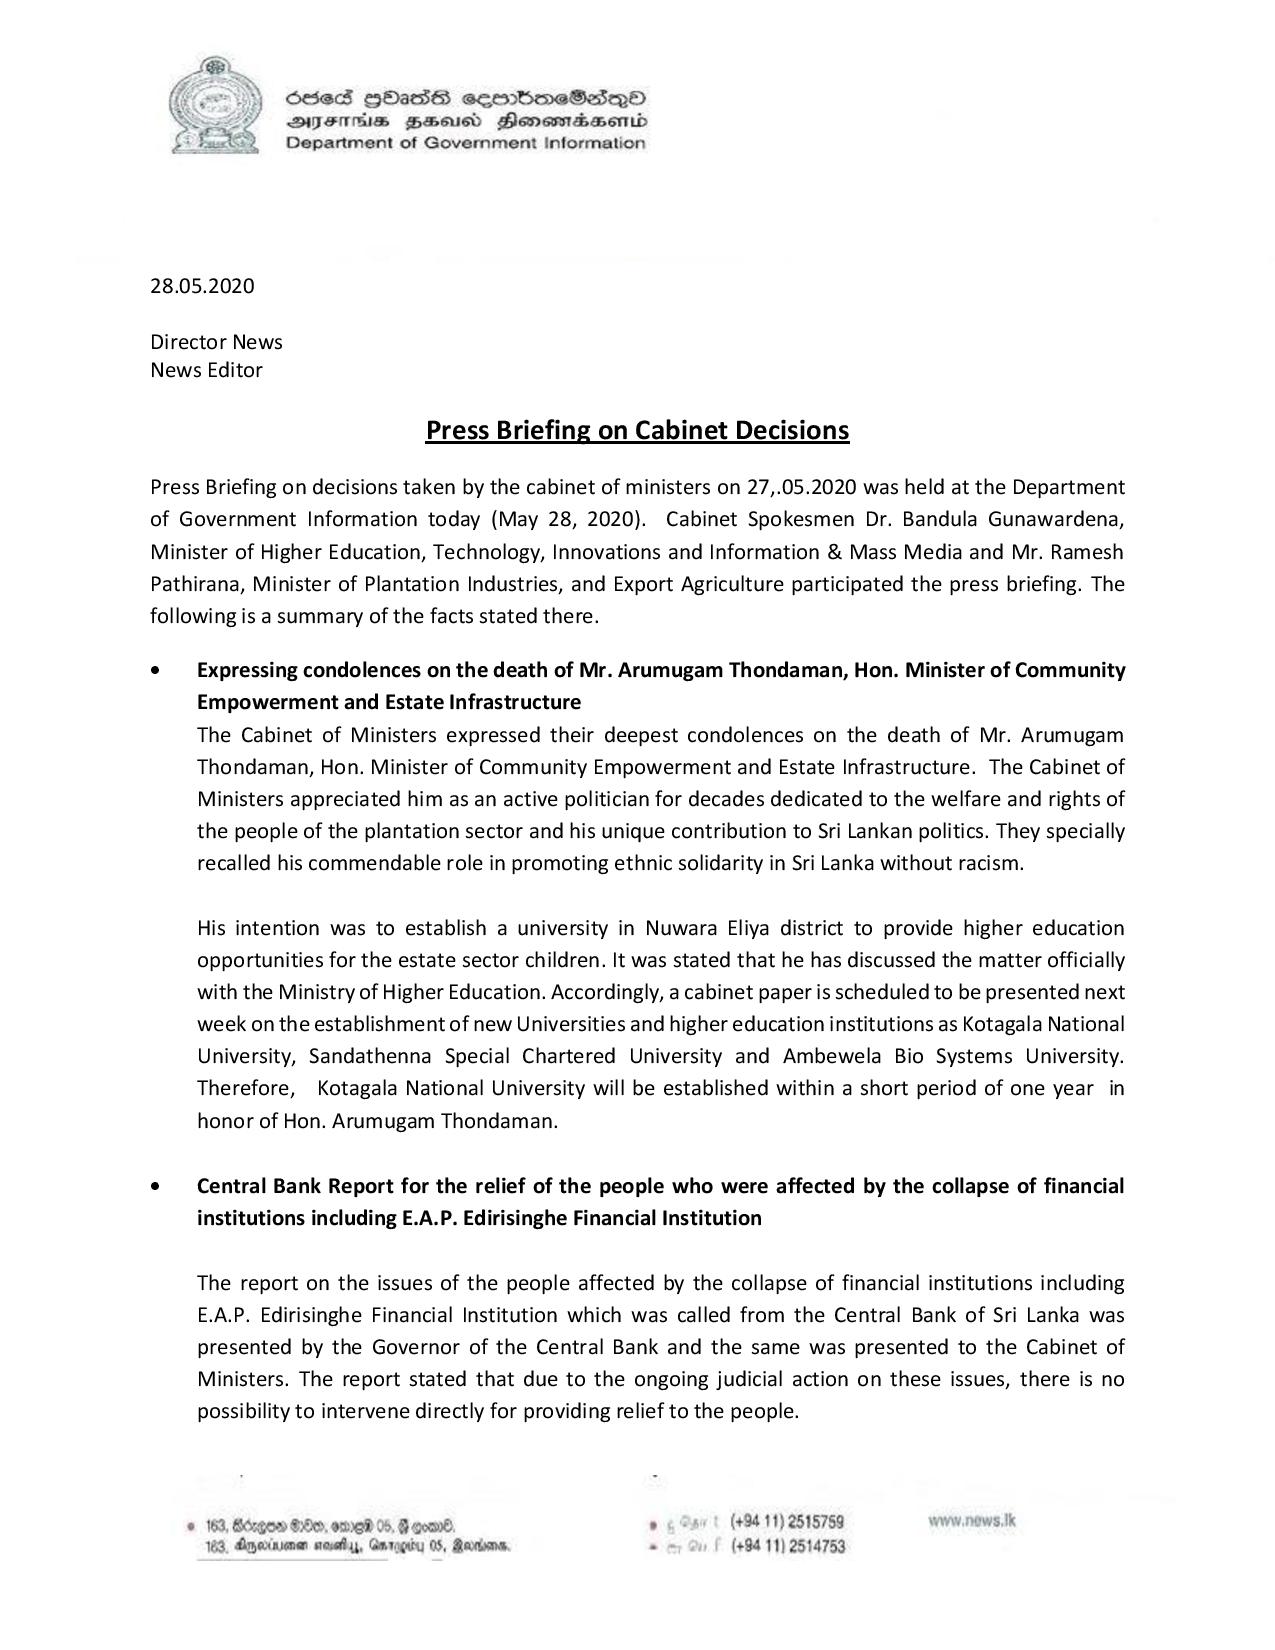 Press Briefing on Cabinet Decisions page 001